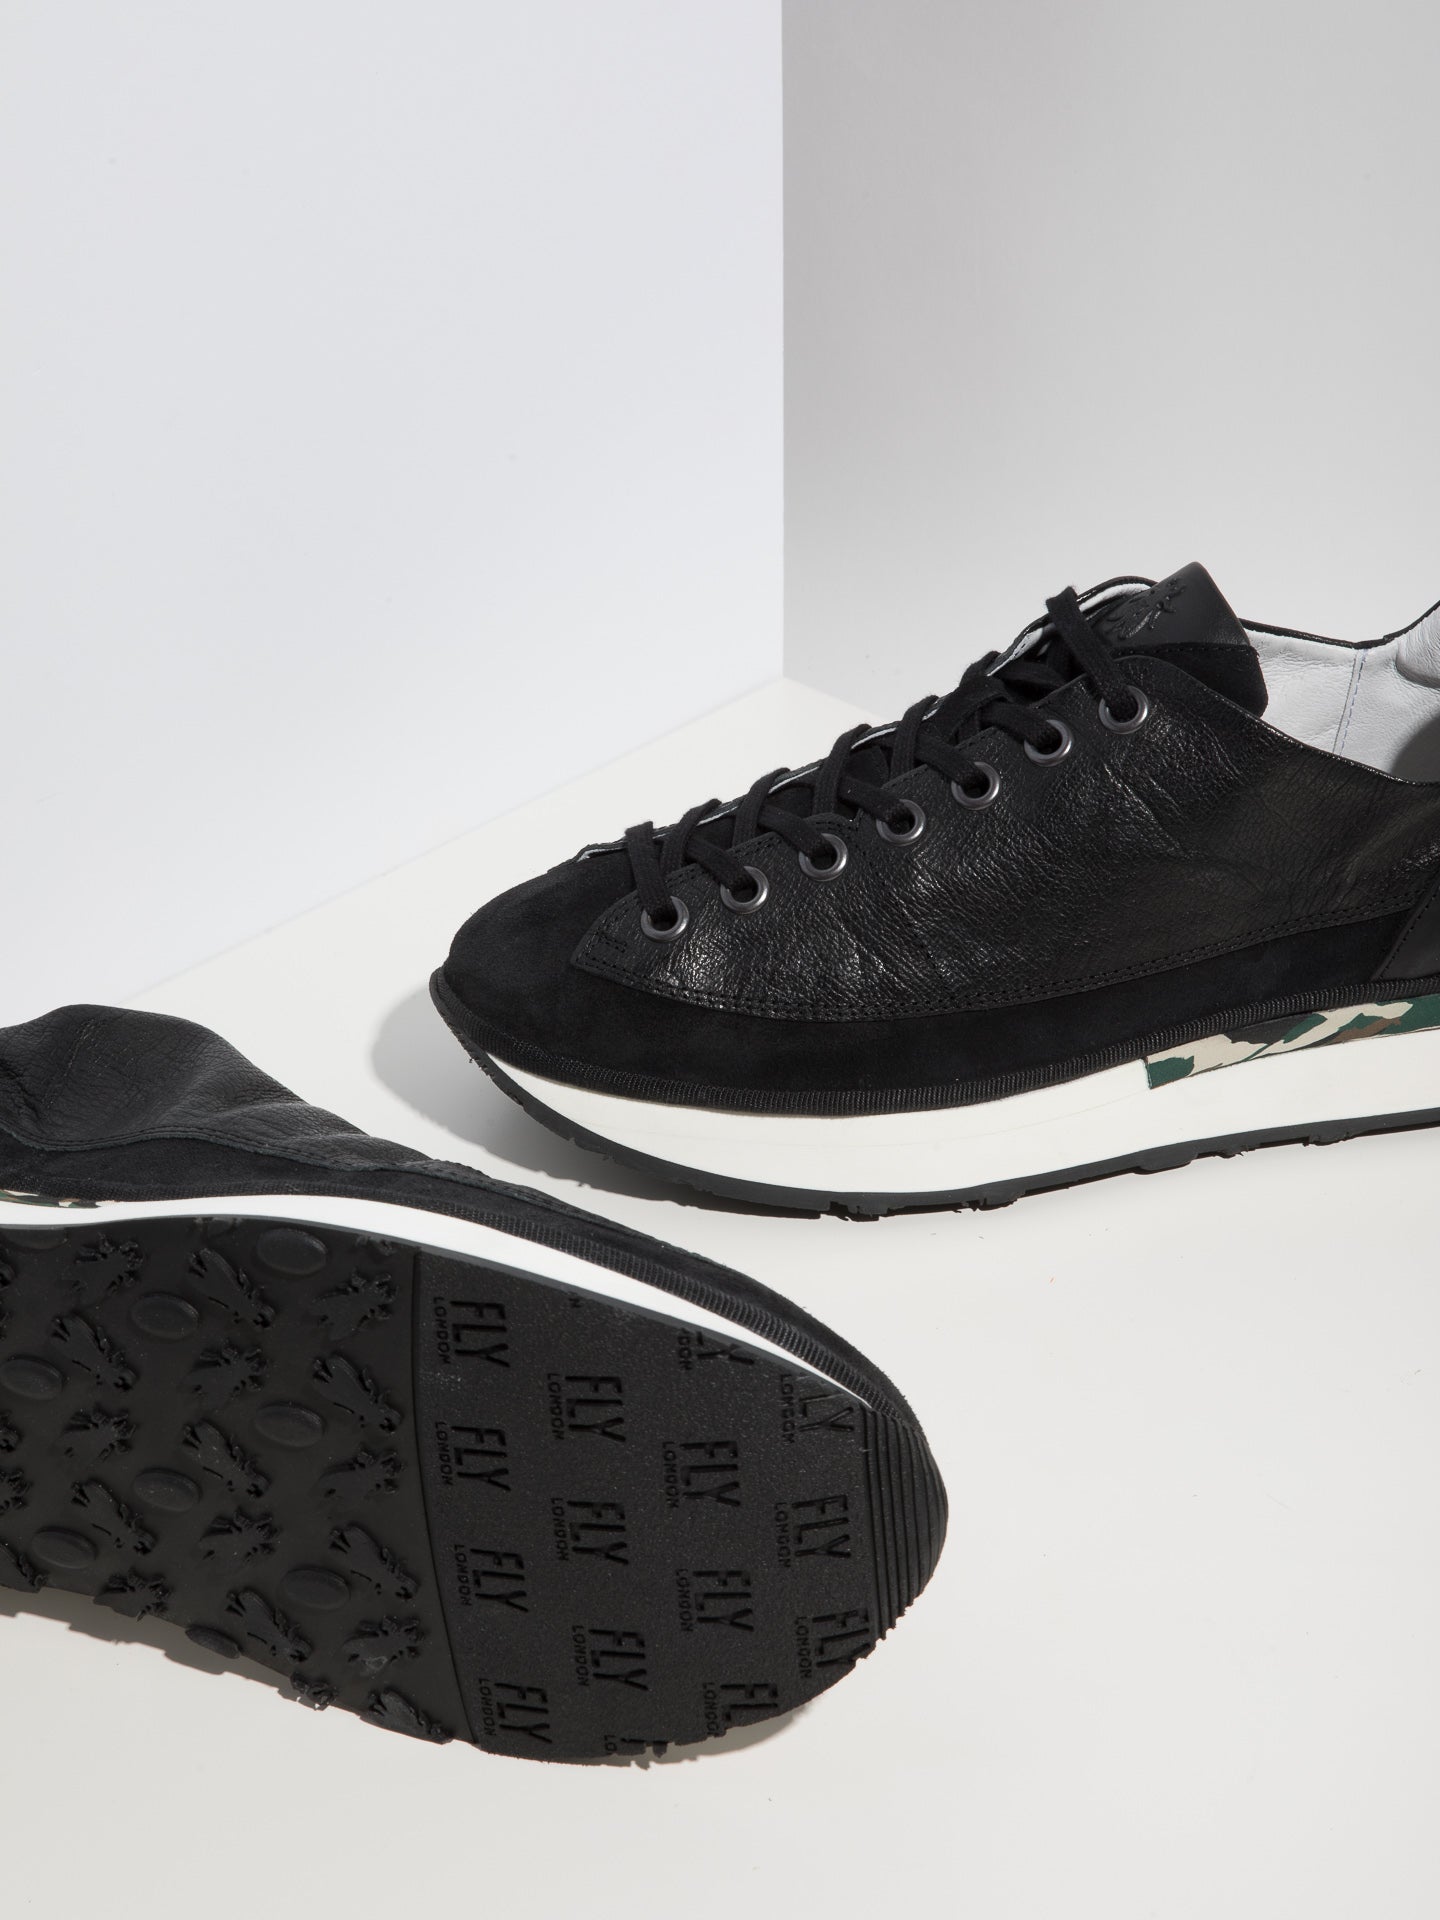 Fly London Black Lace-up Trainers